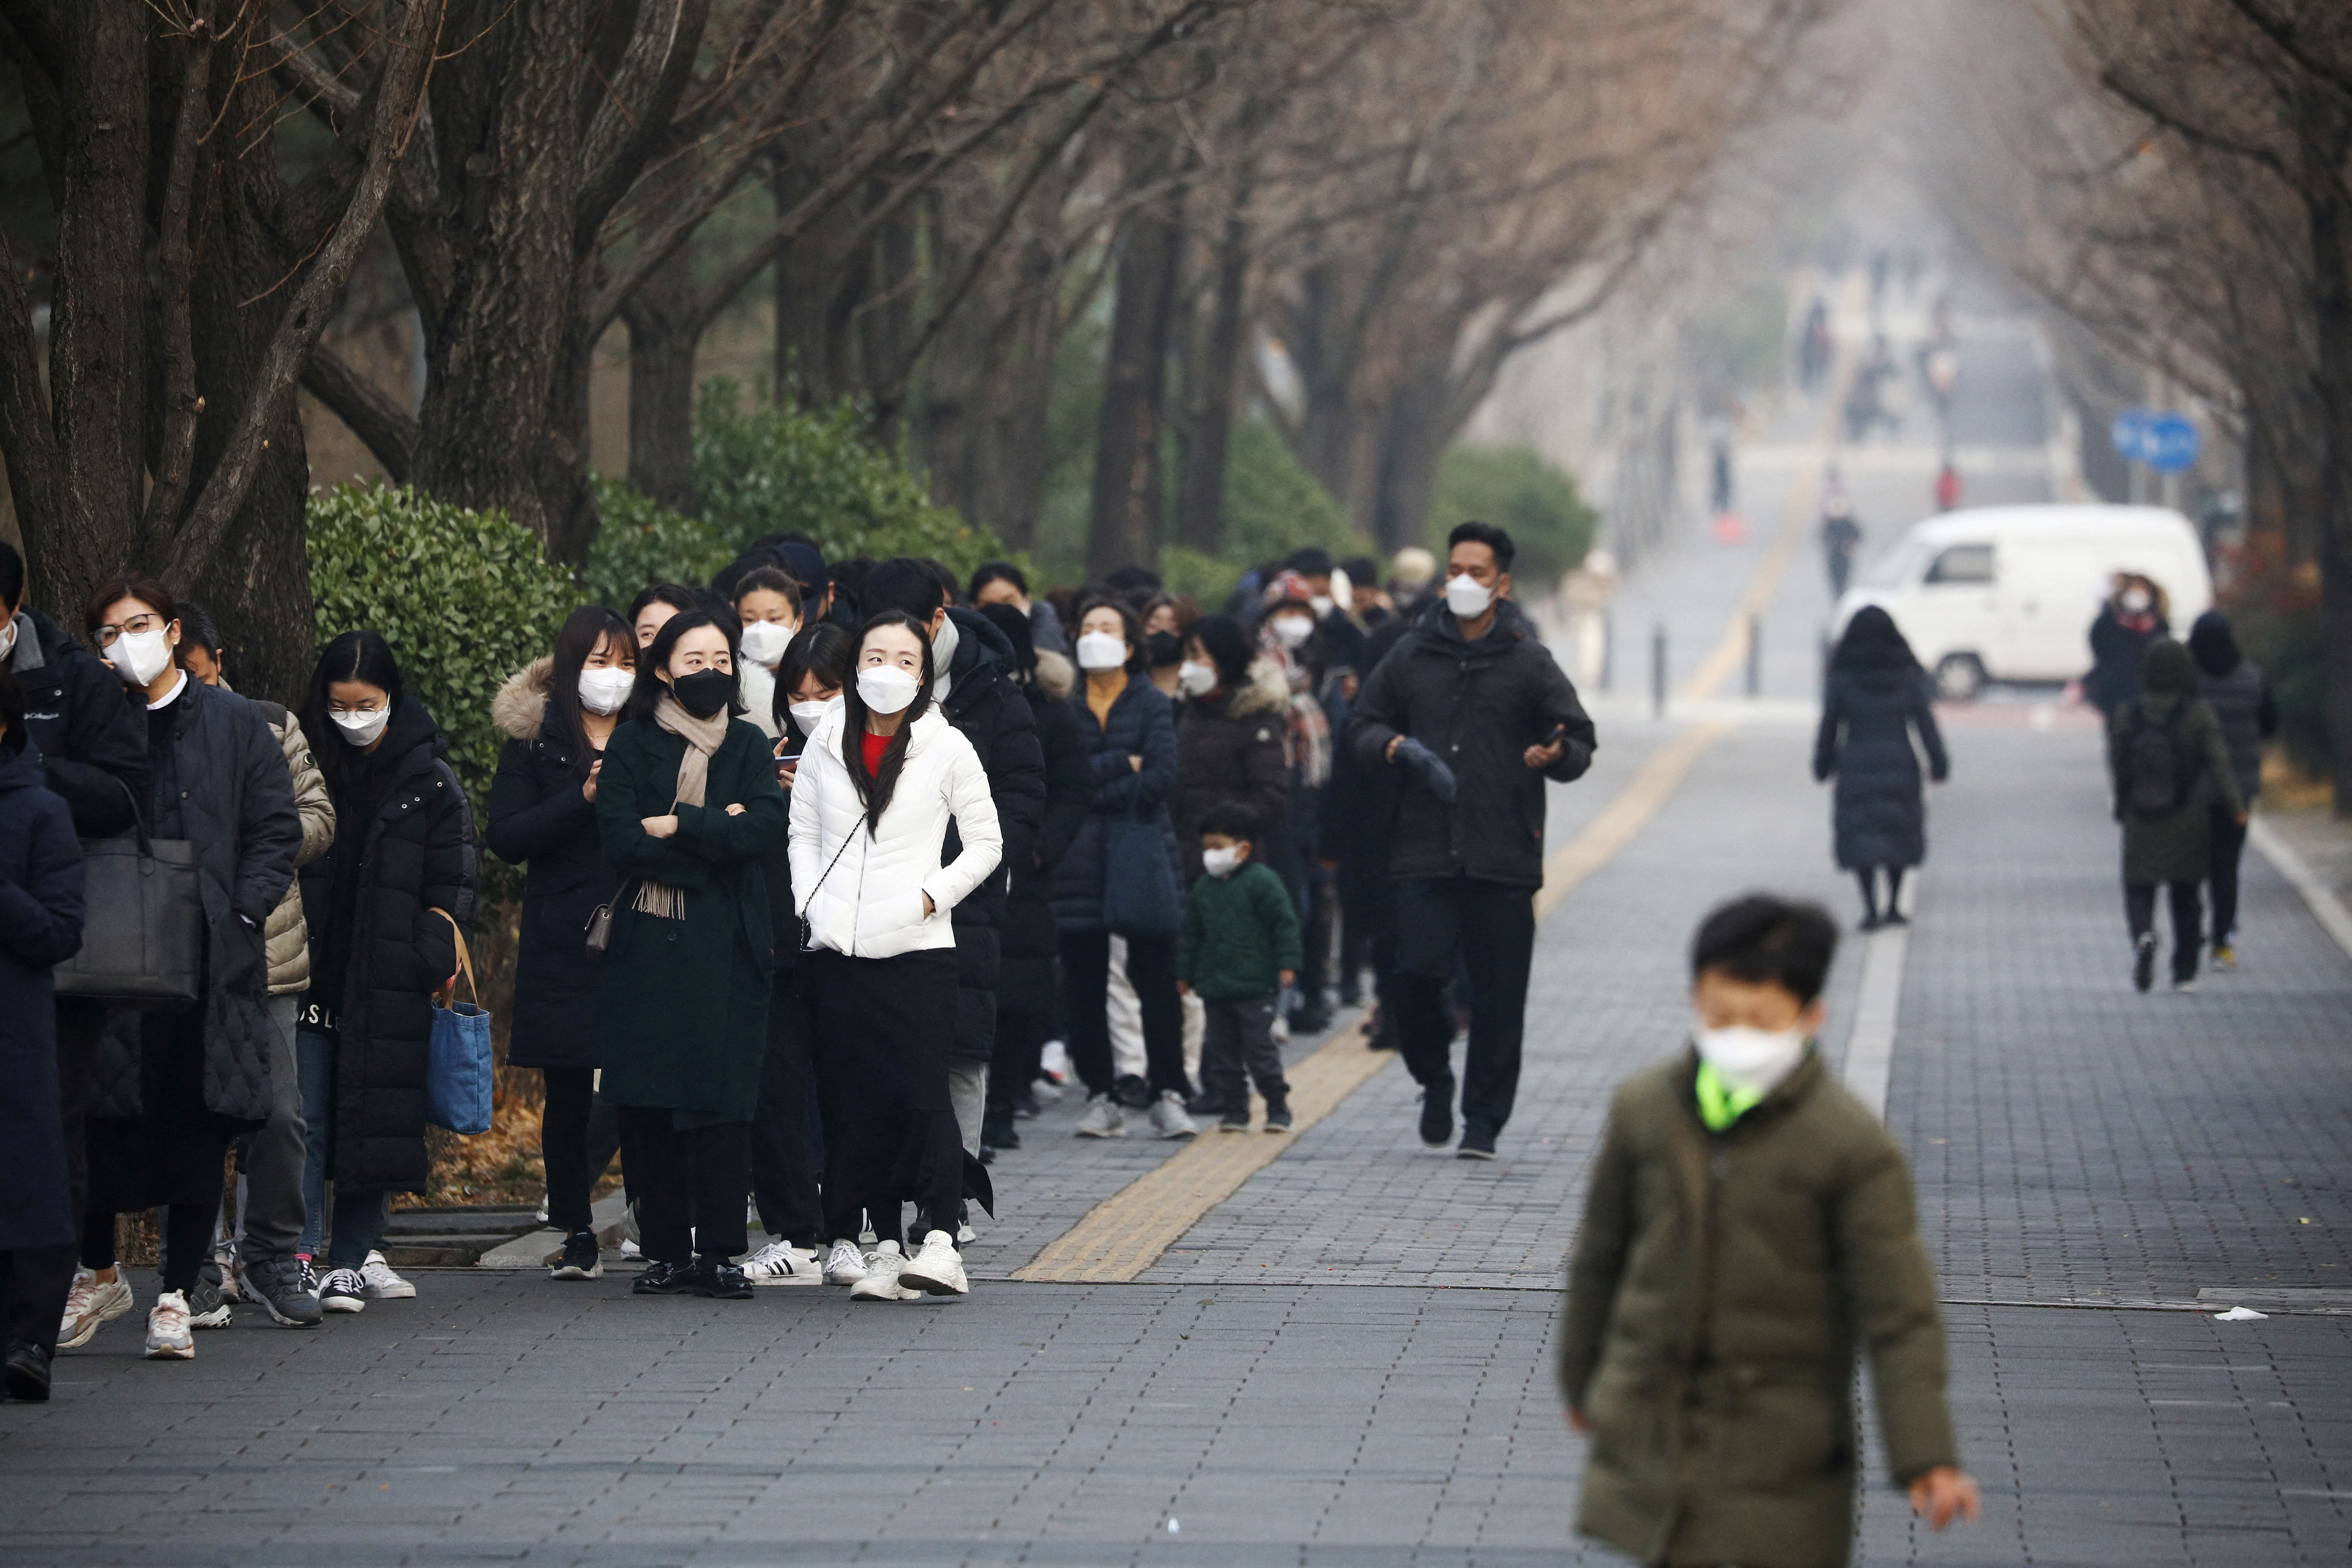 People wait in a long line to undergo coronavirus disease (COVID-19) test at a testing site in Seoul